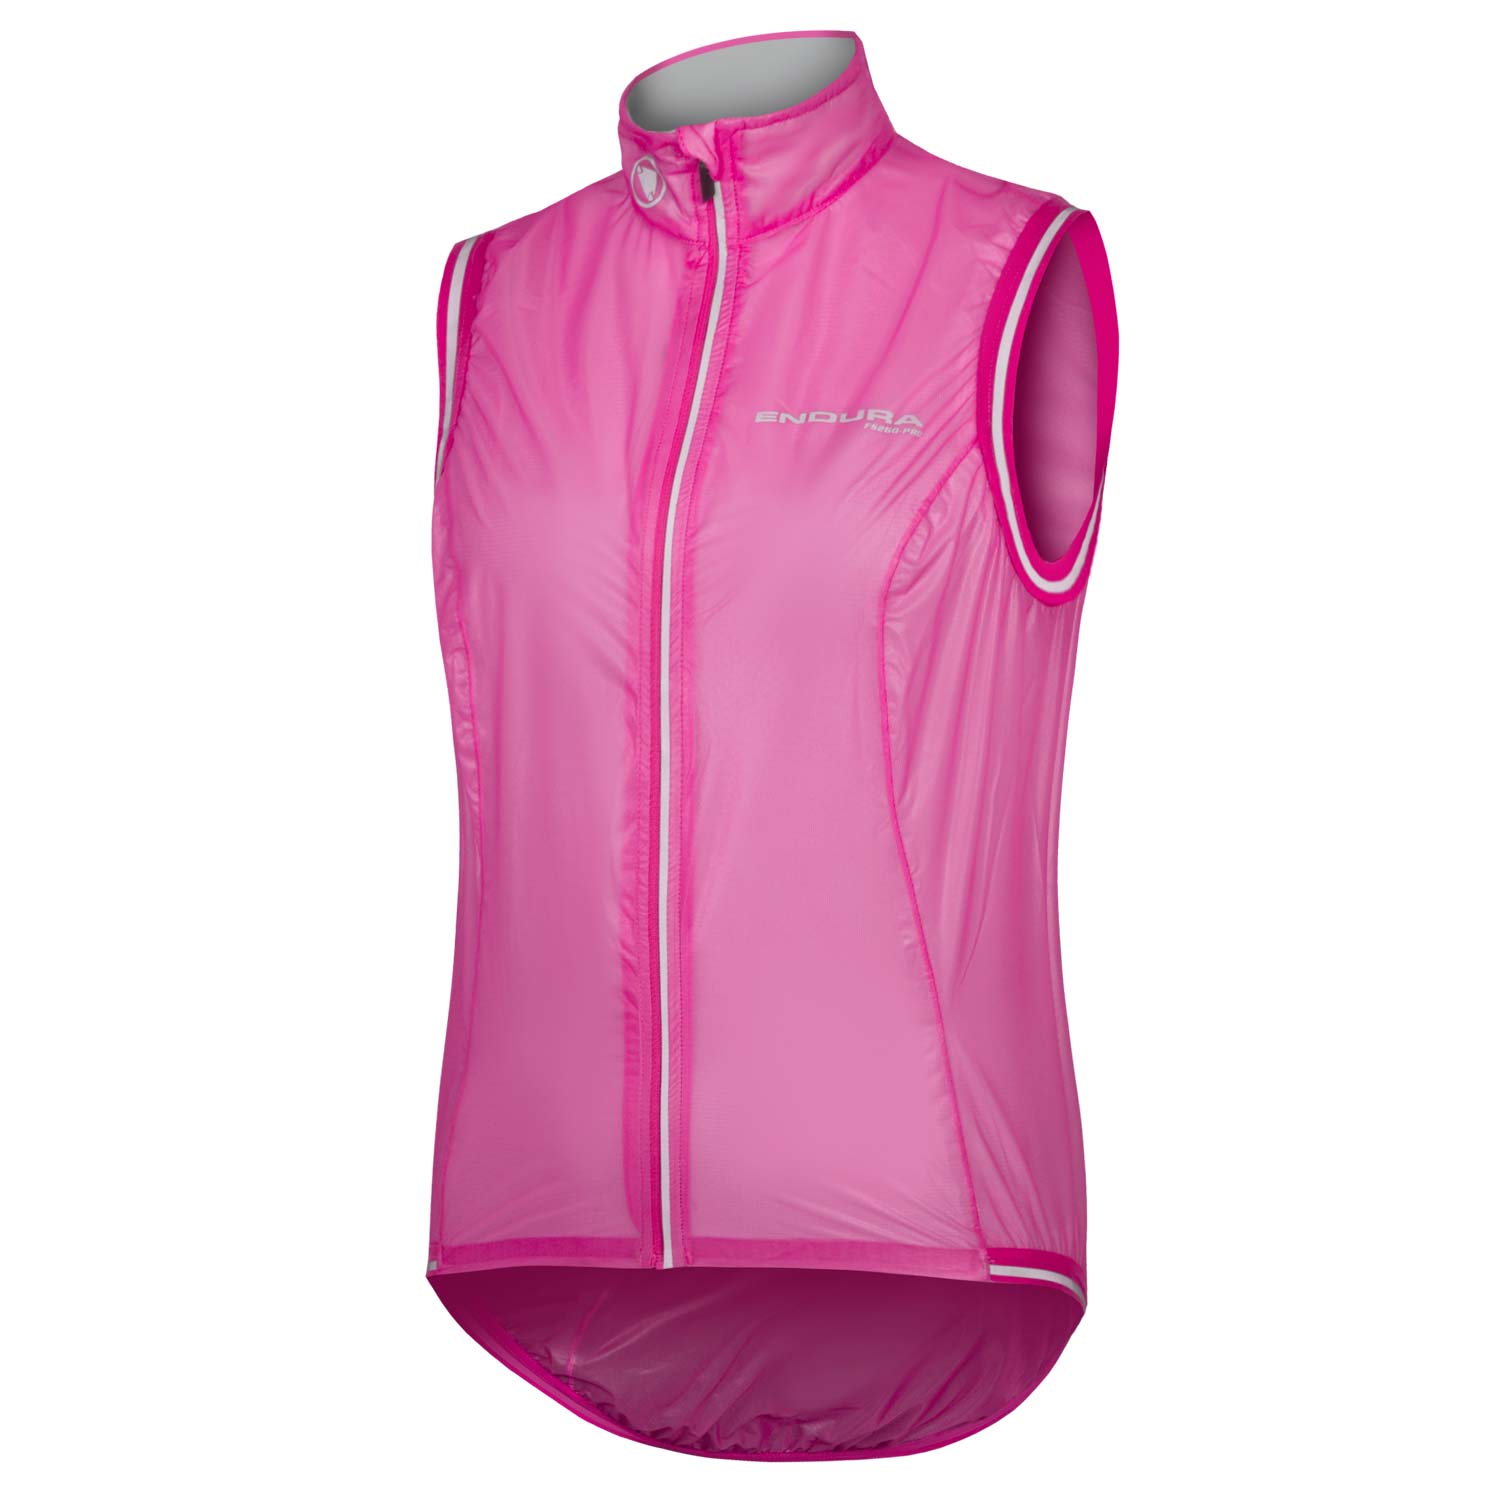 Chaleco impermeable para de mujer FS260-Pro Race I – TrackMTB